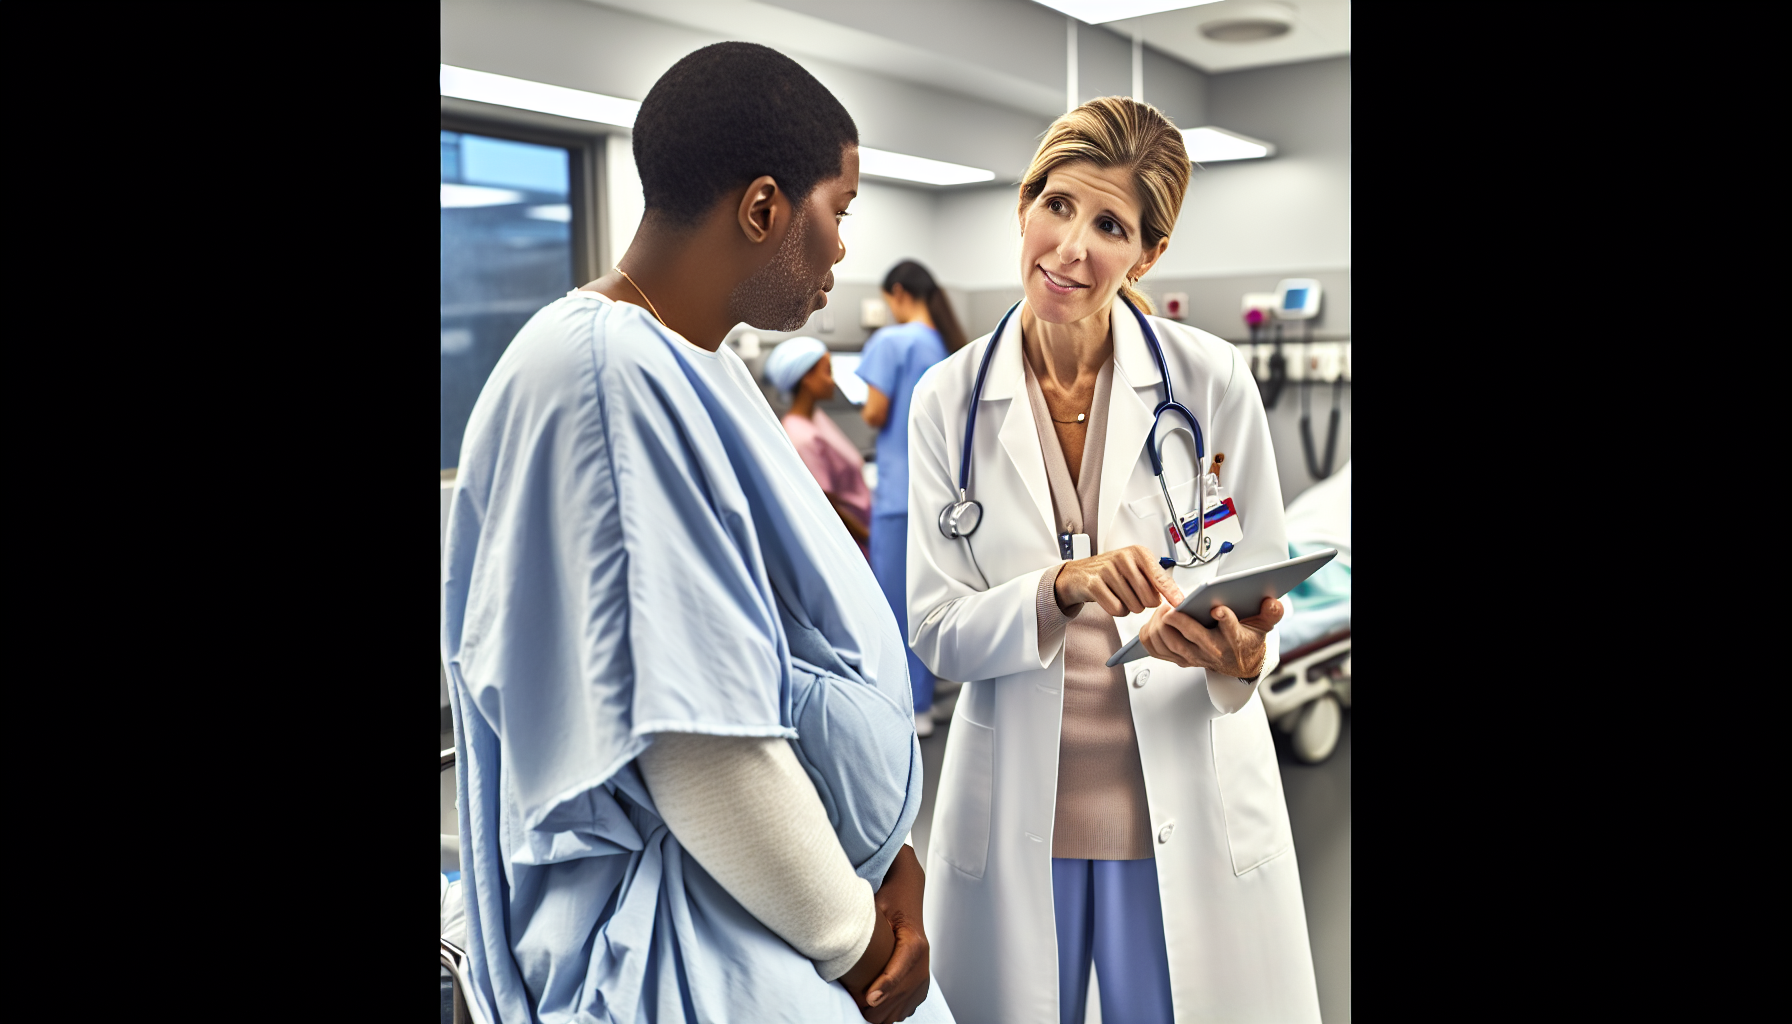 Improving health outcomes through staffing agencies